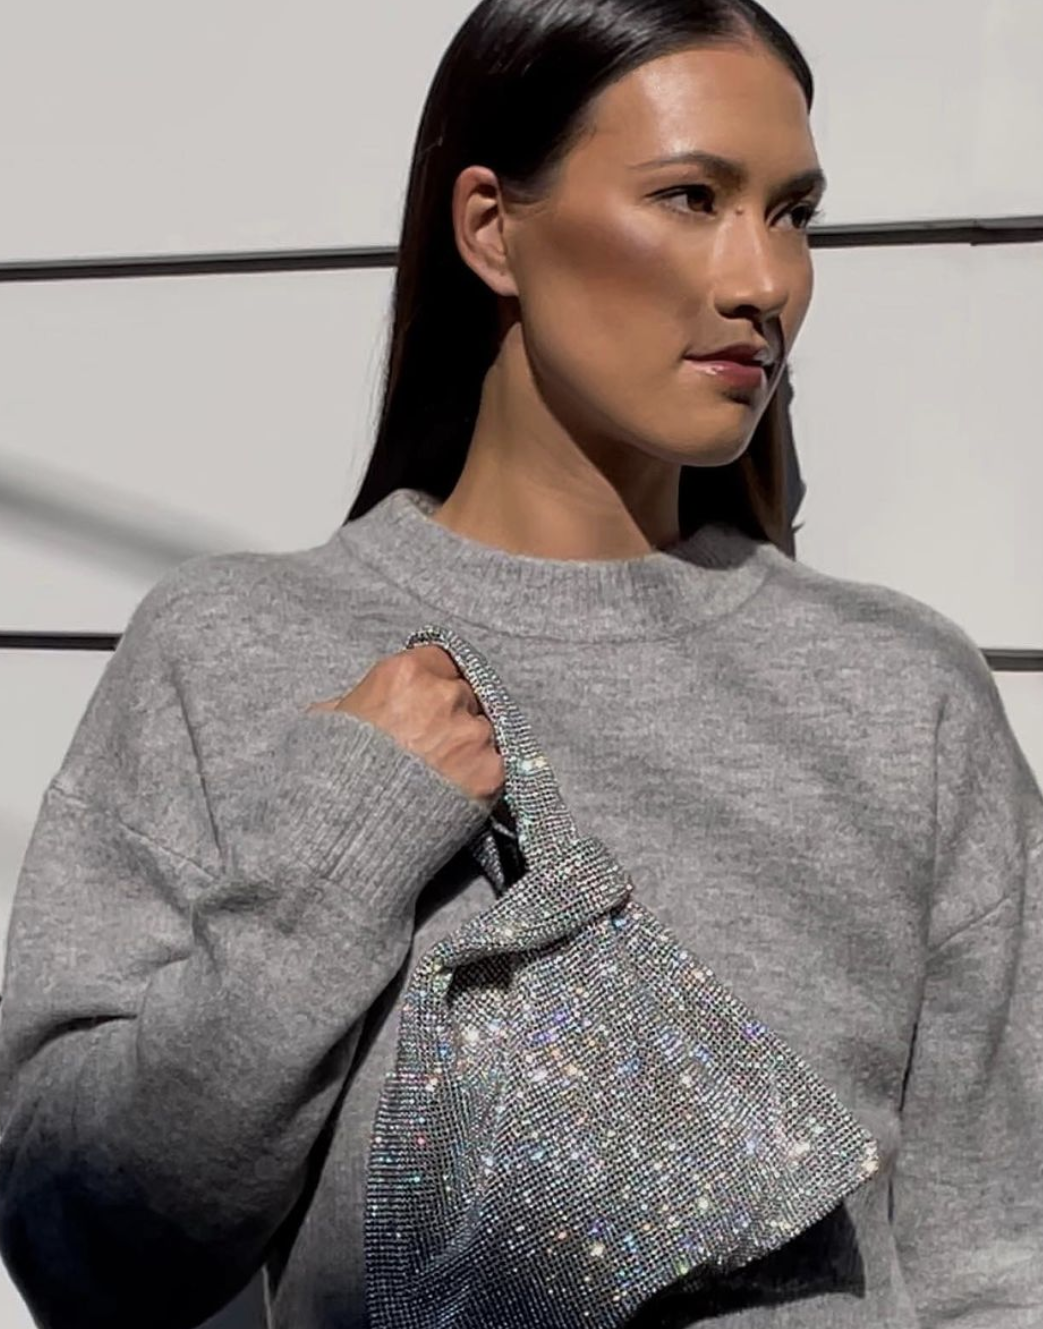 Woman wears a grey crewneck and holds a crystallized, sparkly silver purse.